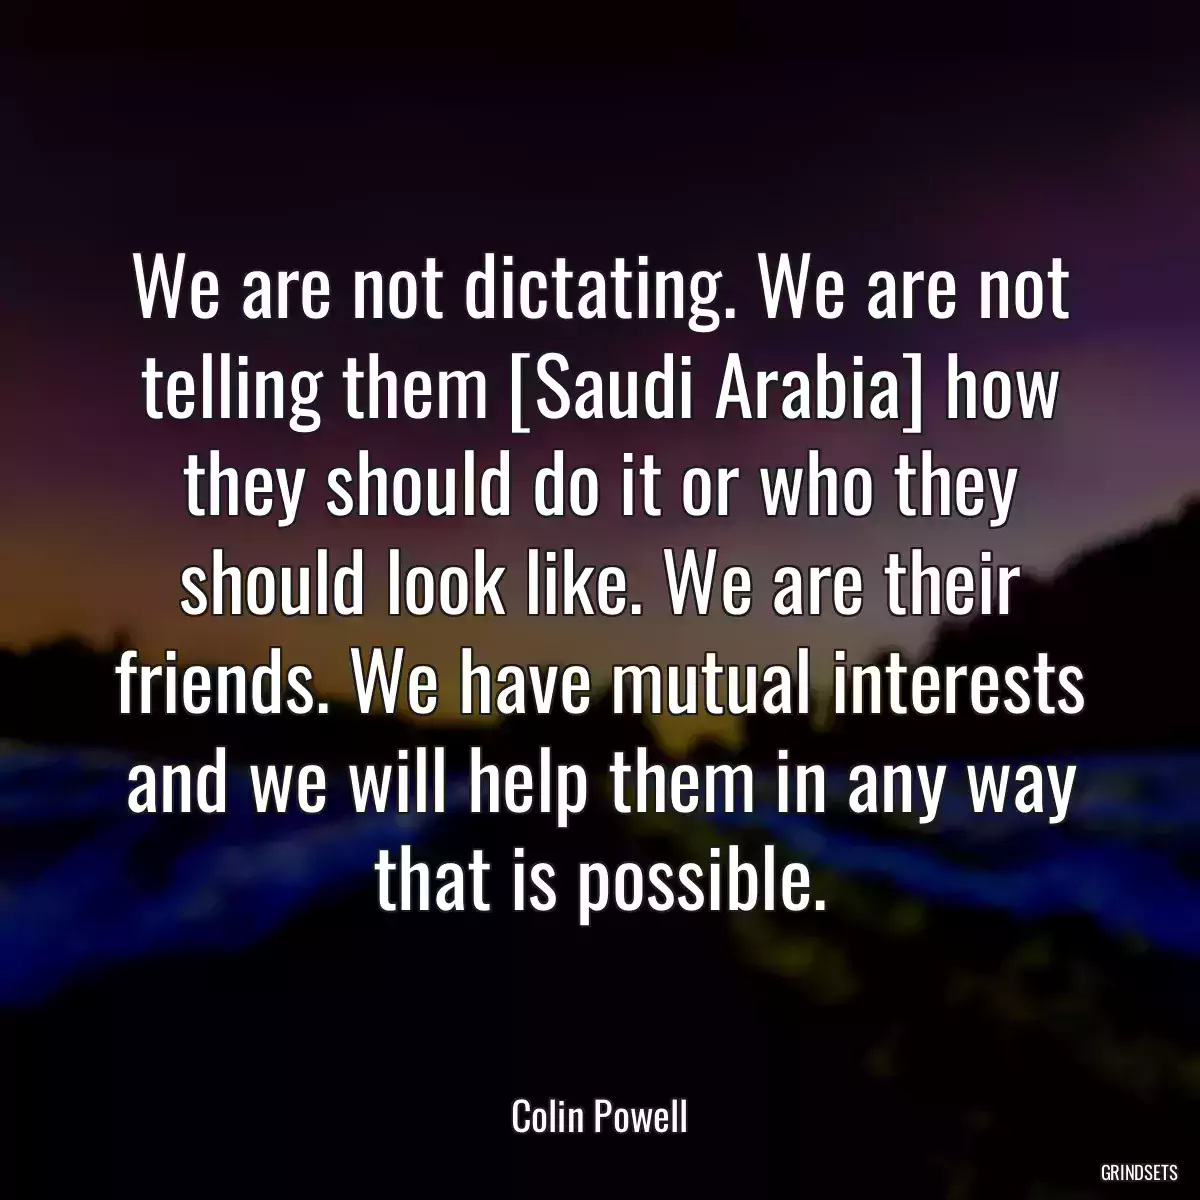 We are not dictating. We are not telling them [Saudi Arabia] how they should do it or who they should look like. We are their friends. We have mutual interests and we will help them in any way that is possible.